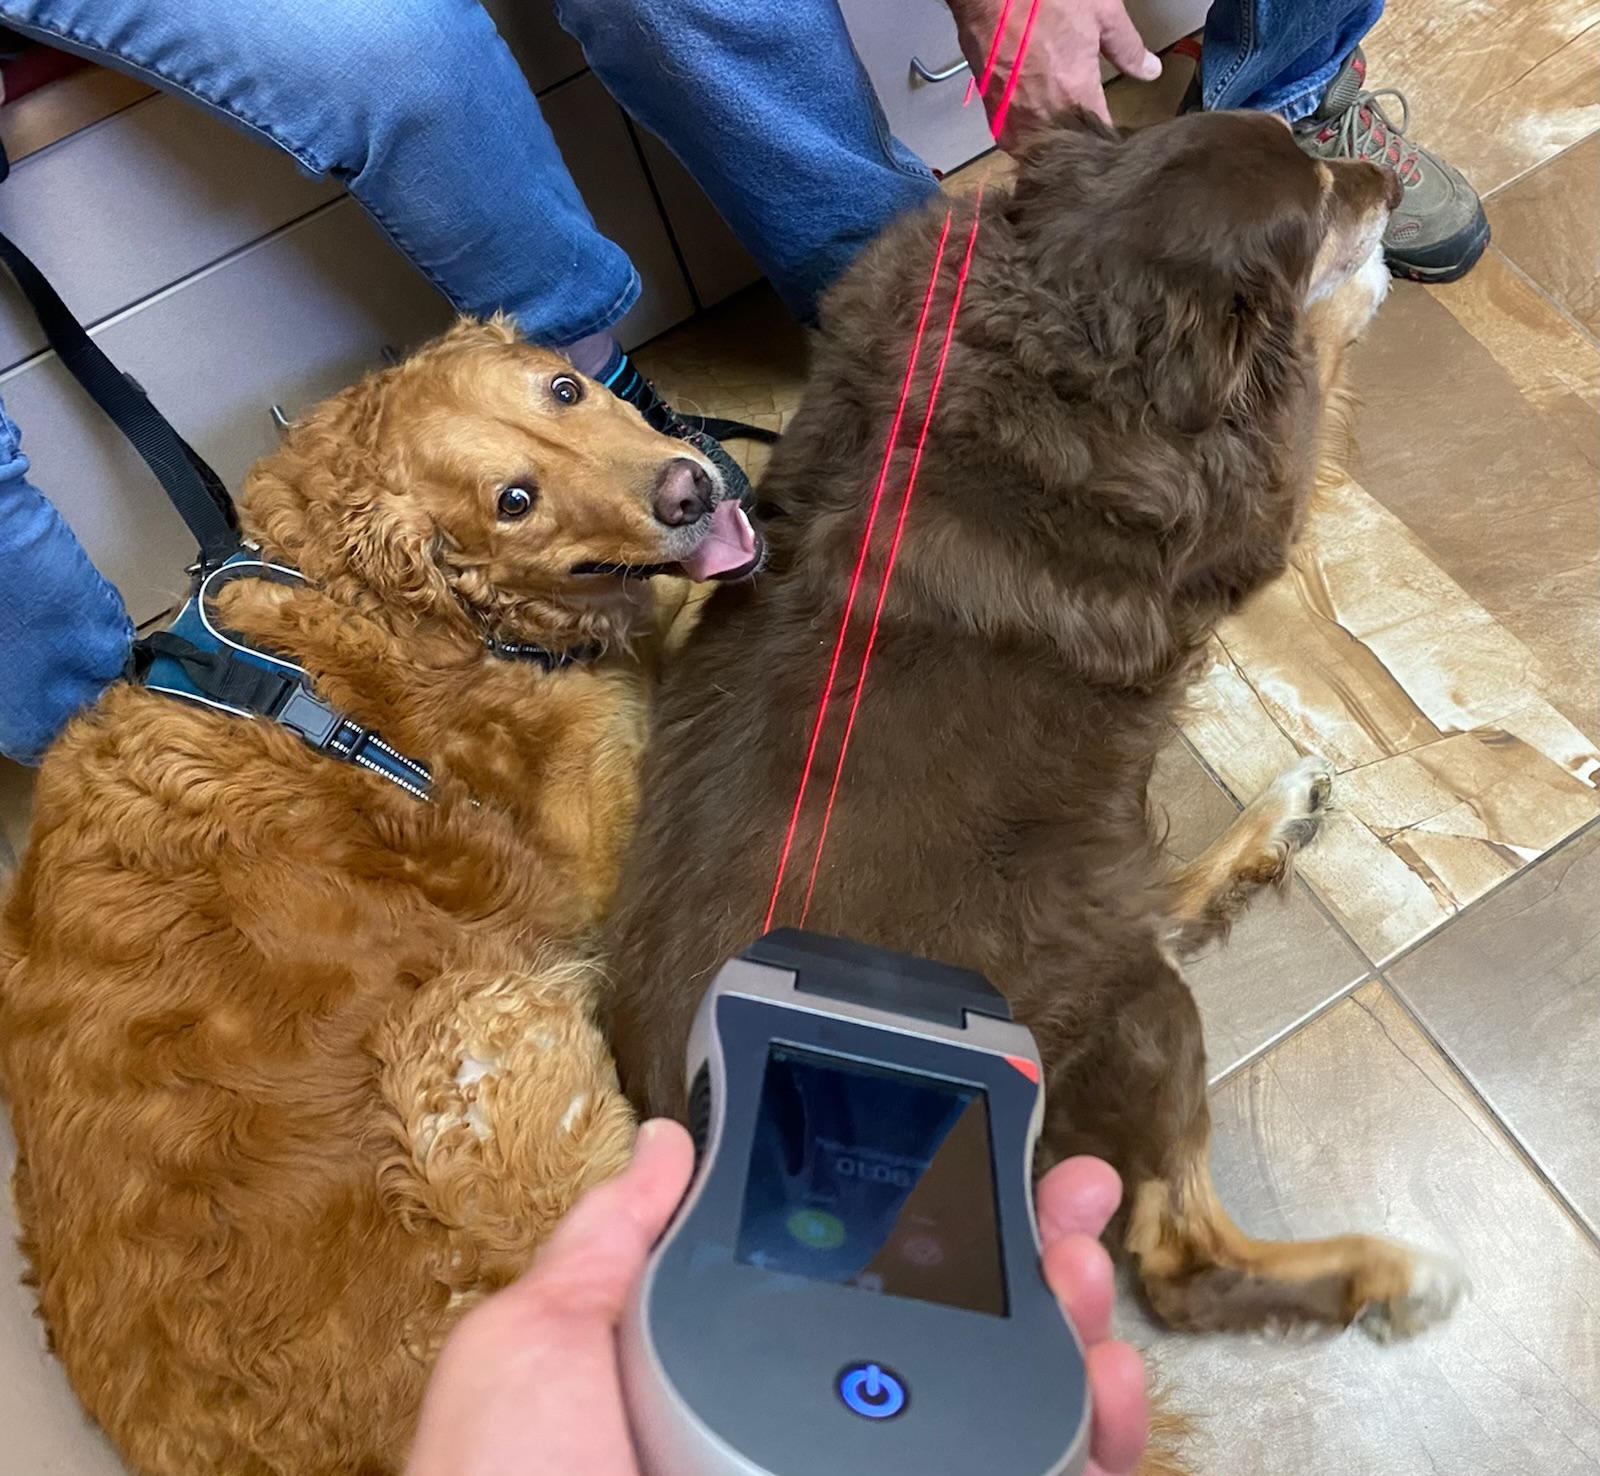 Dog getting treated by the VLS veterinary red laser